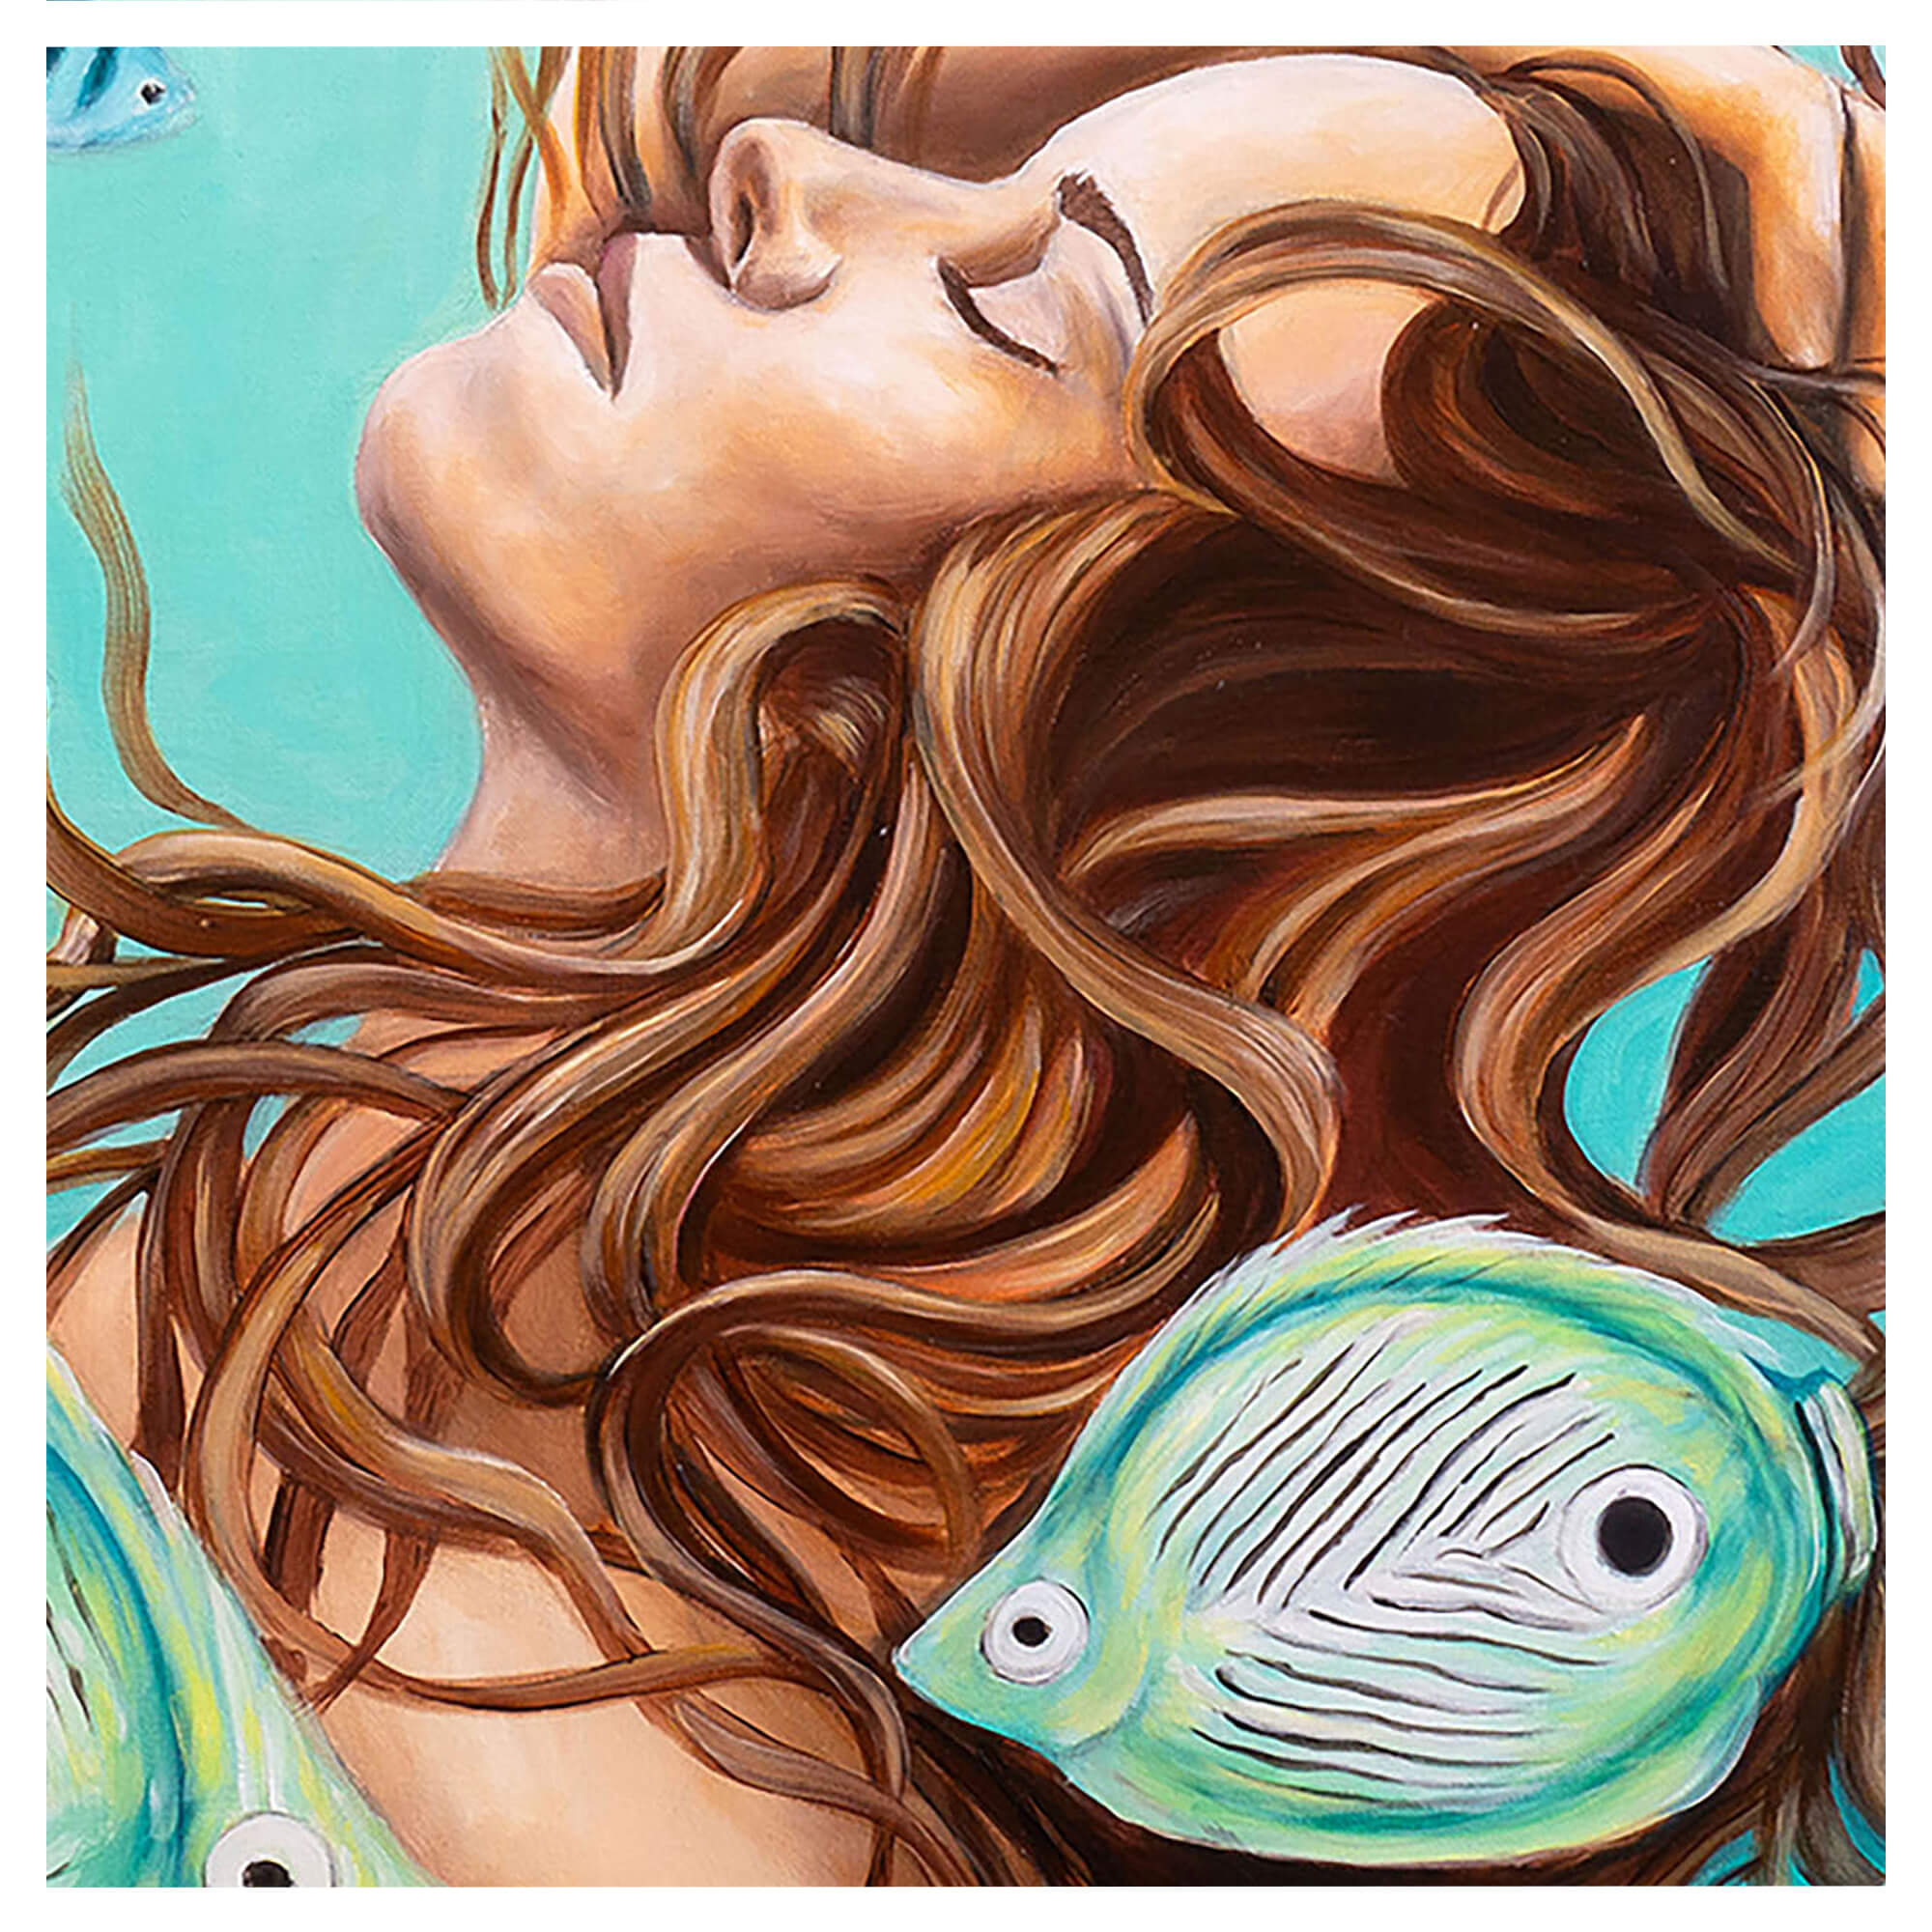 Painting of a woman's face underwater with some colorful fish by Hawaii artist Laihha Organna